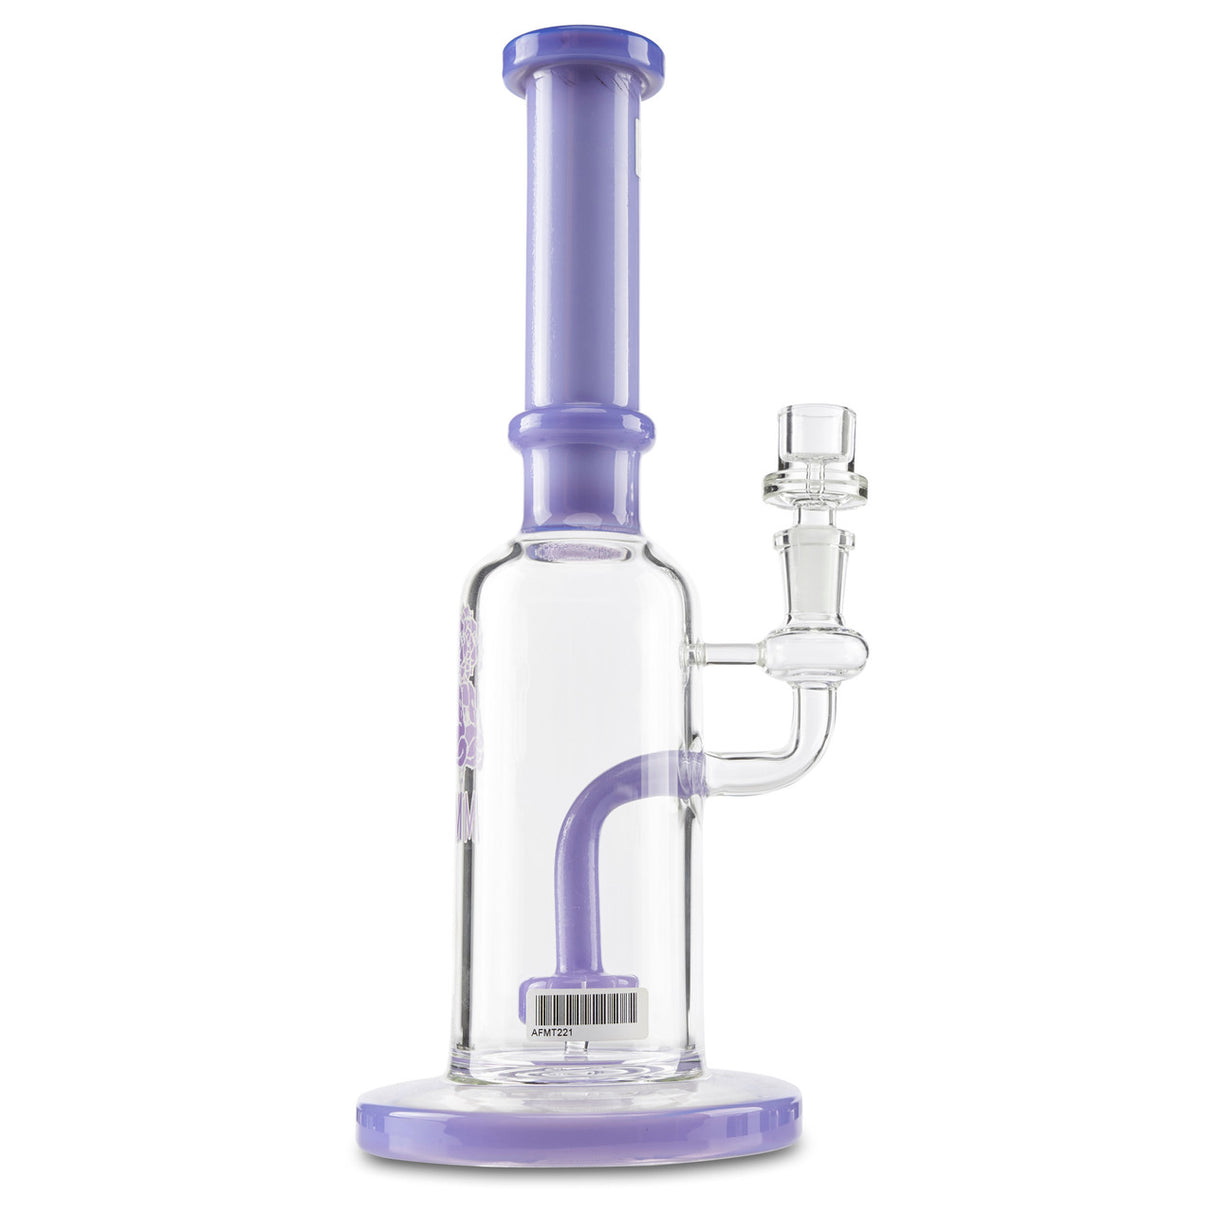 afm showerhead glass rig with 14mm joint